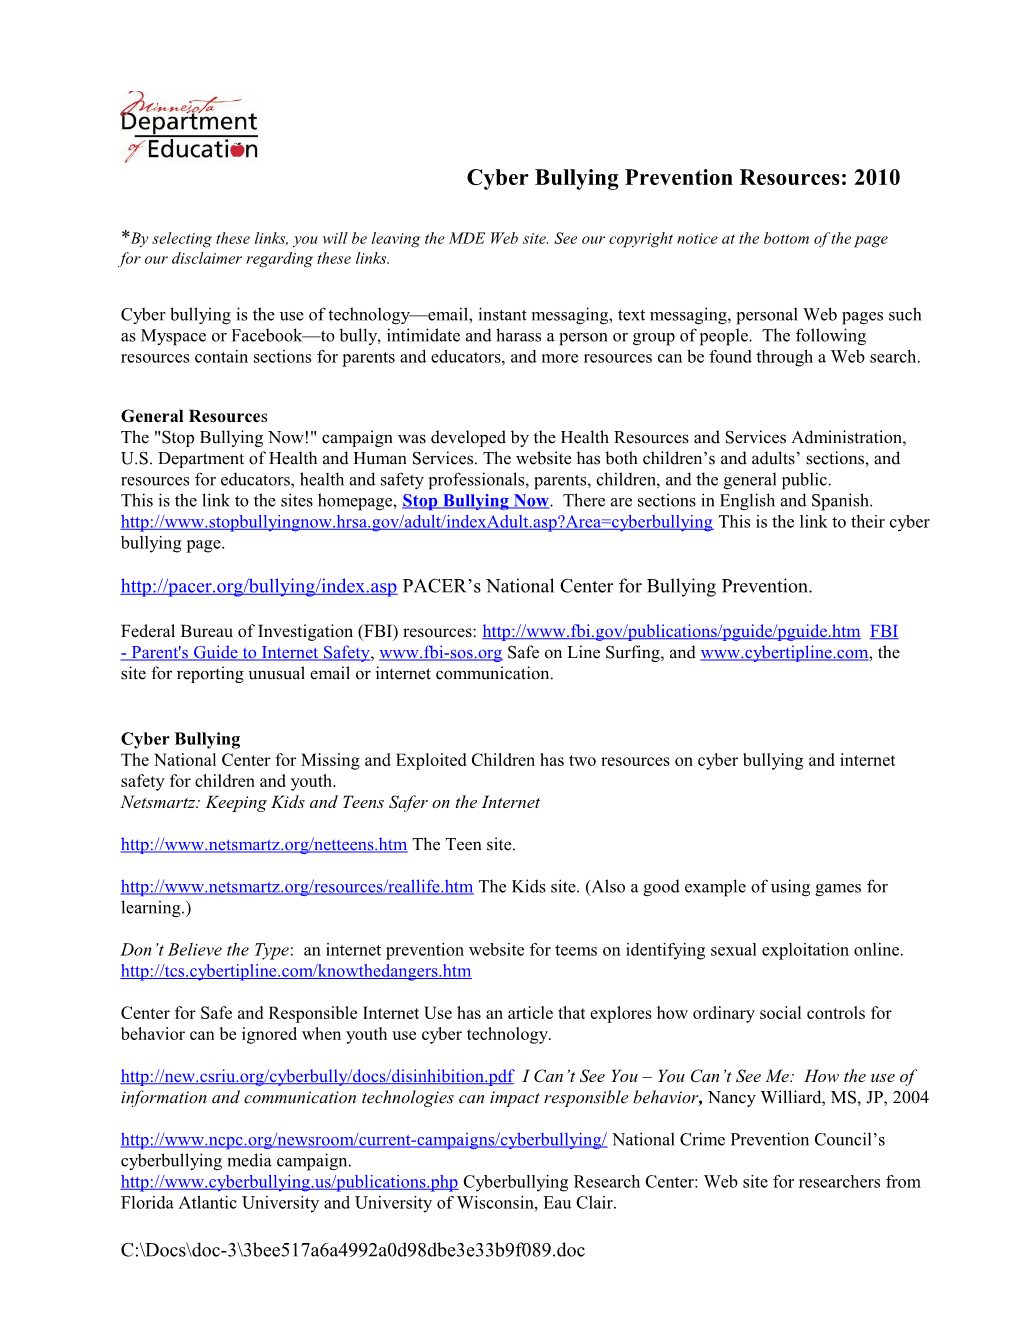 Cyberbullying Prevention Resources: 2006